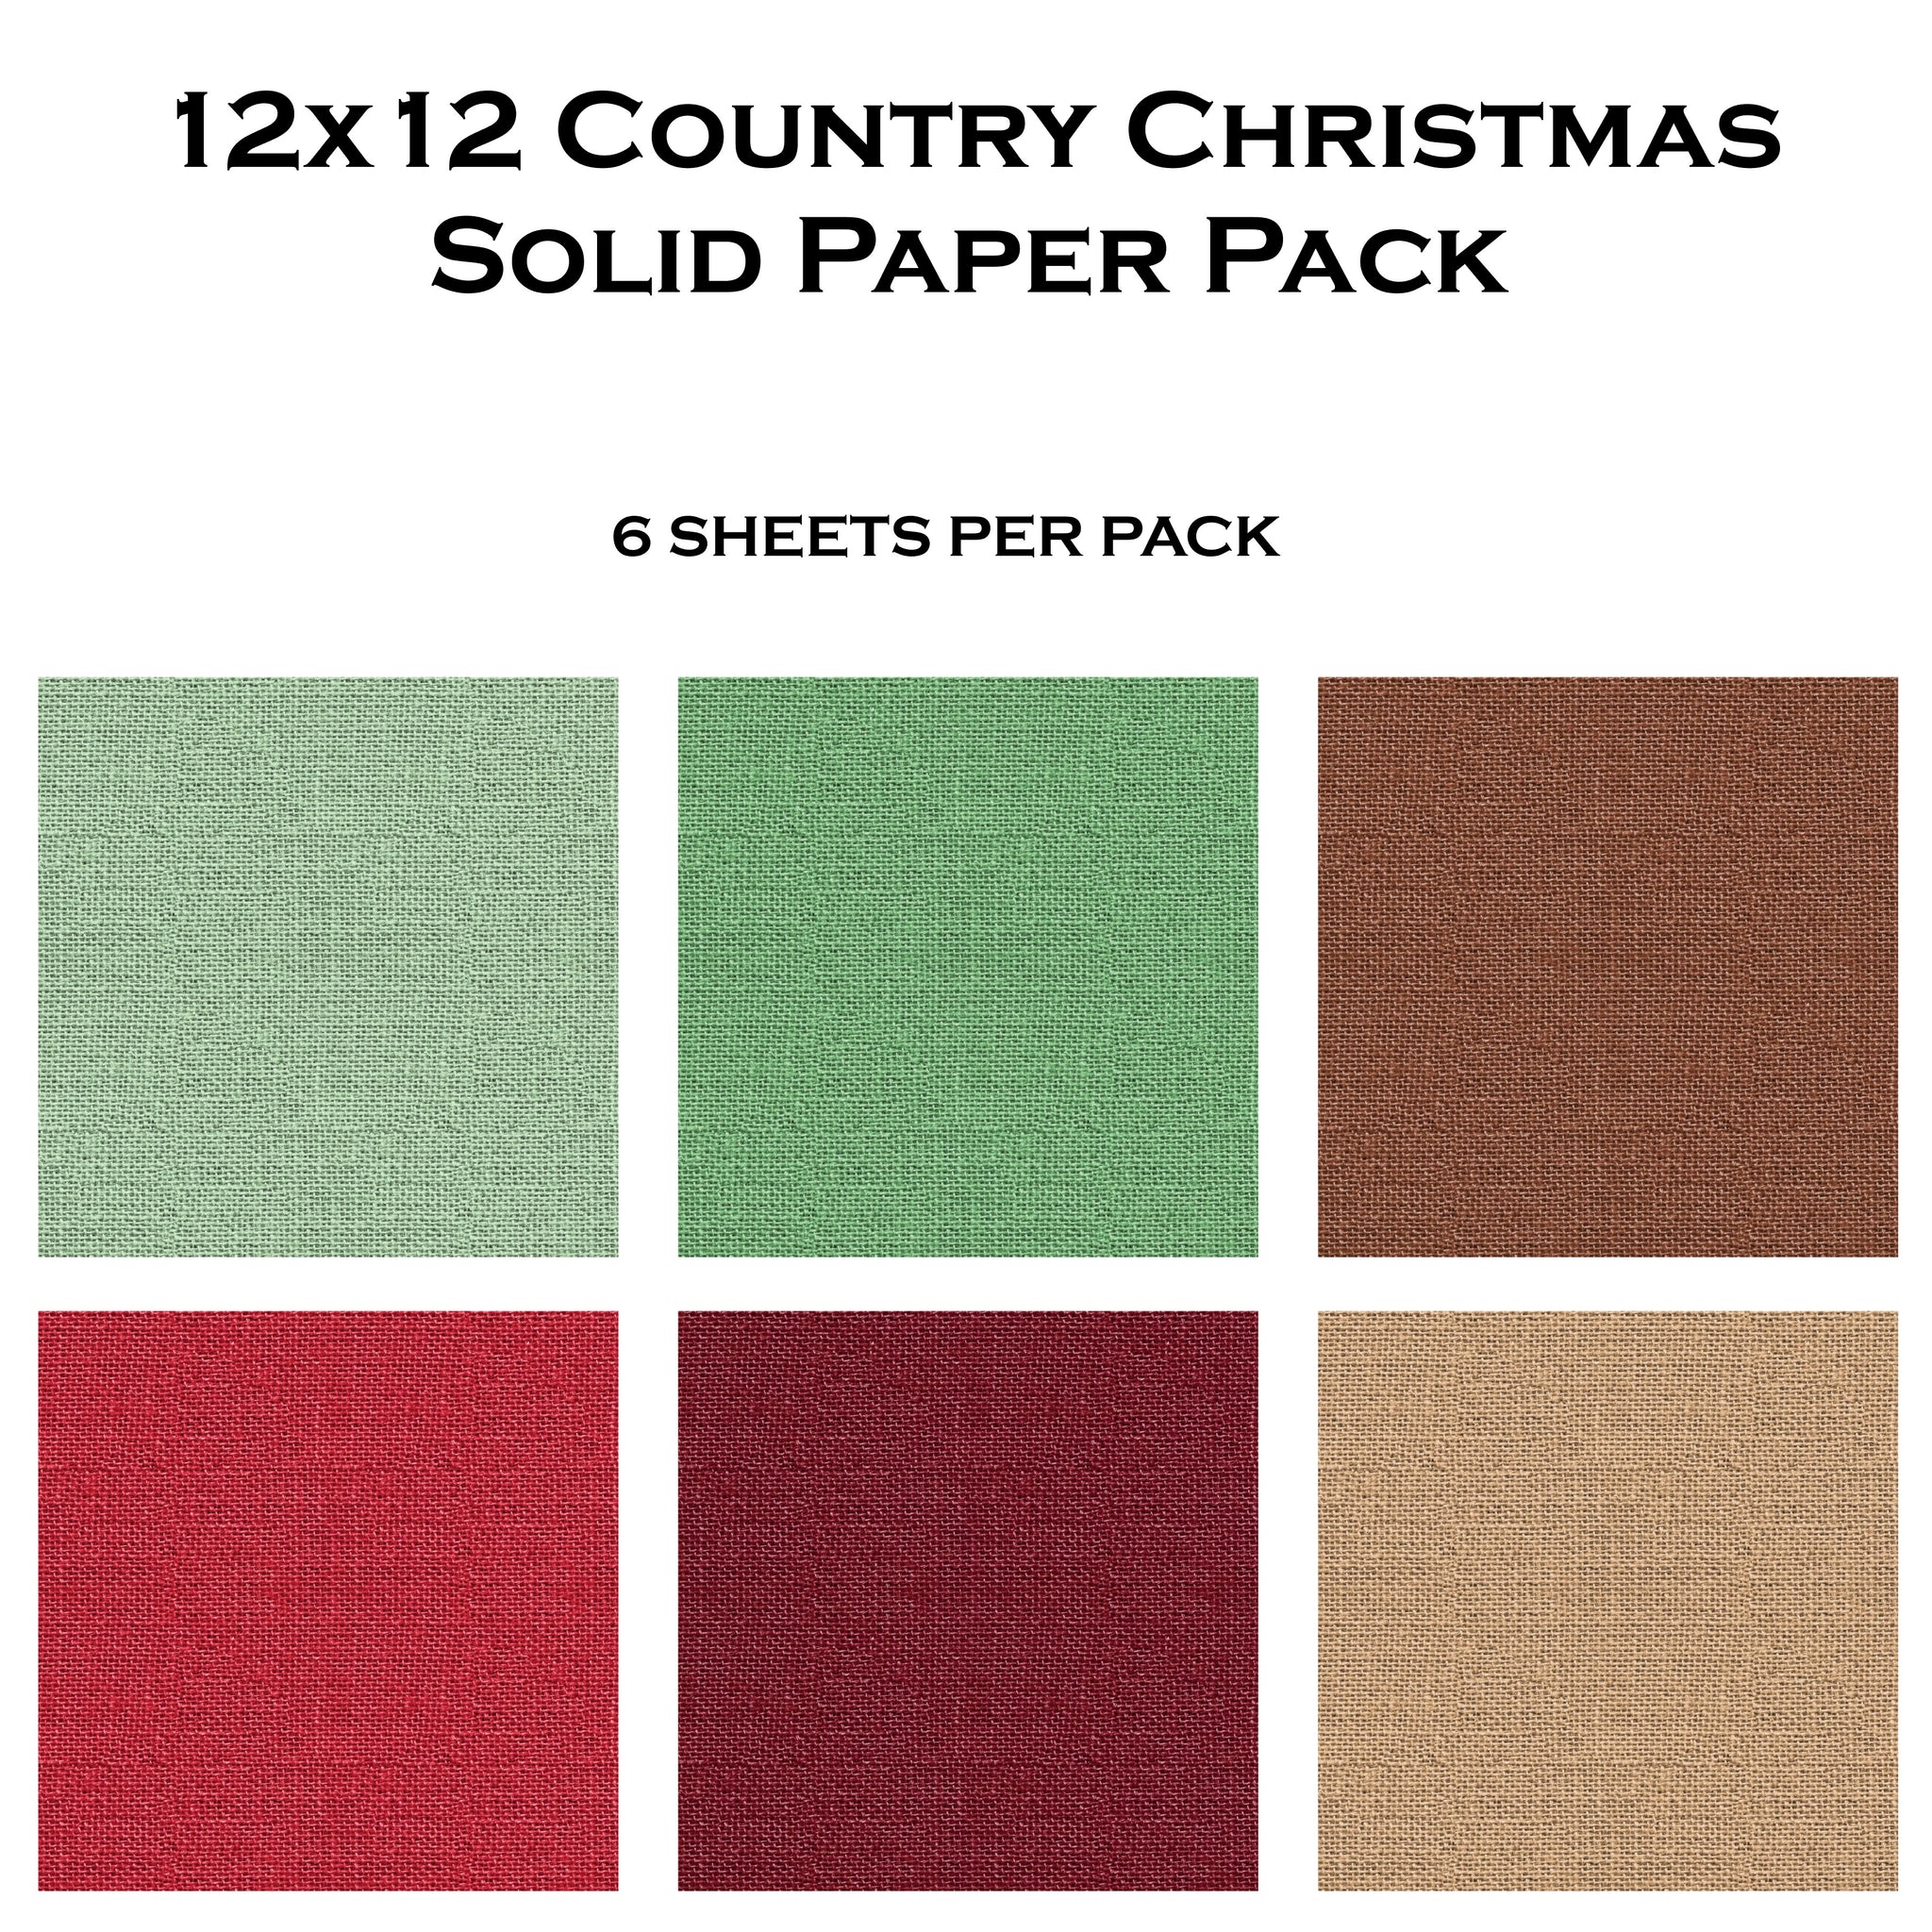 Country Christmas 12x12 Solid Paper Pack